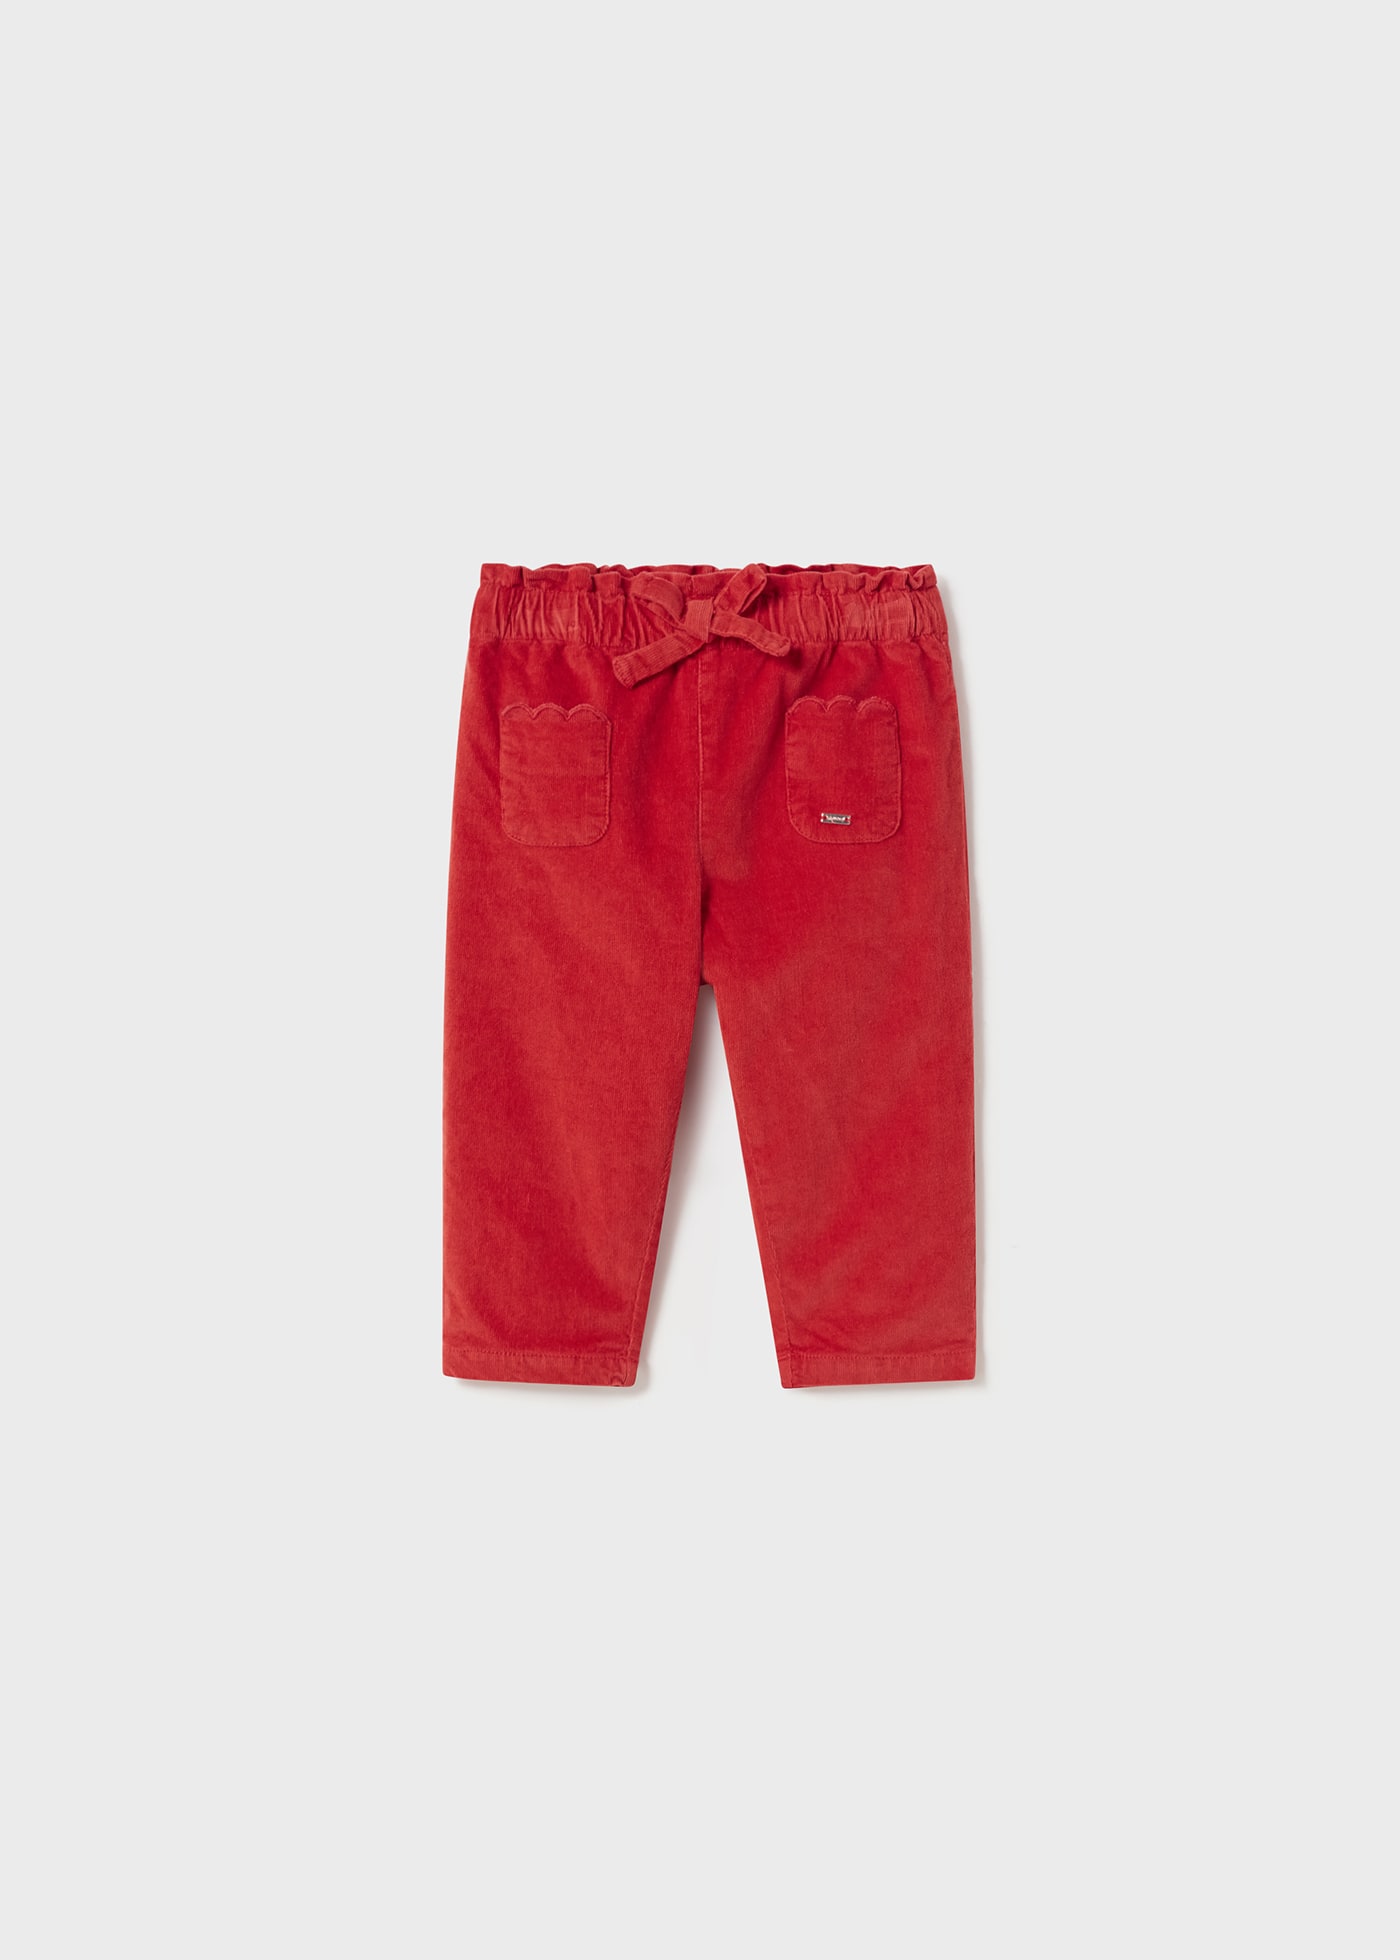 Cordhose Slouchy Baby